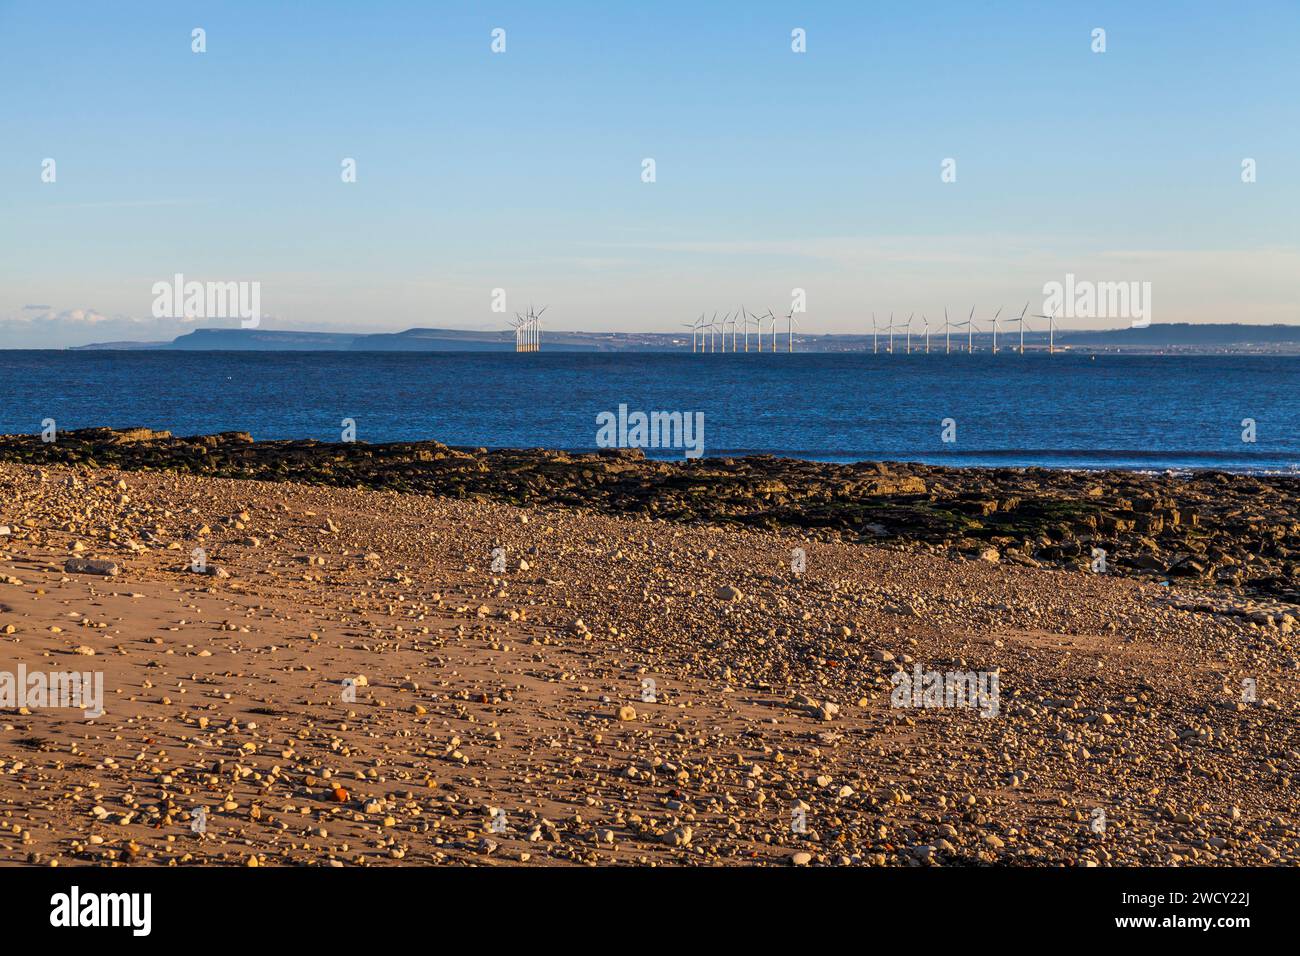 The offshore wind turbines of the coast at Hartlepool,England,UK with rocky beach in foreground Stock Photo